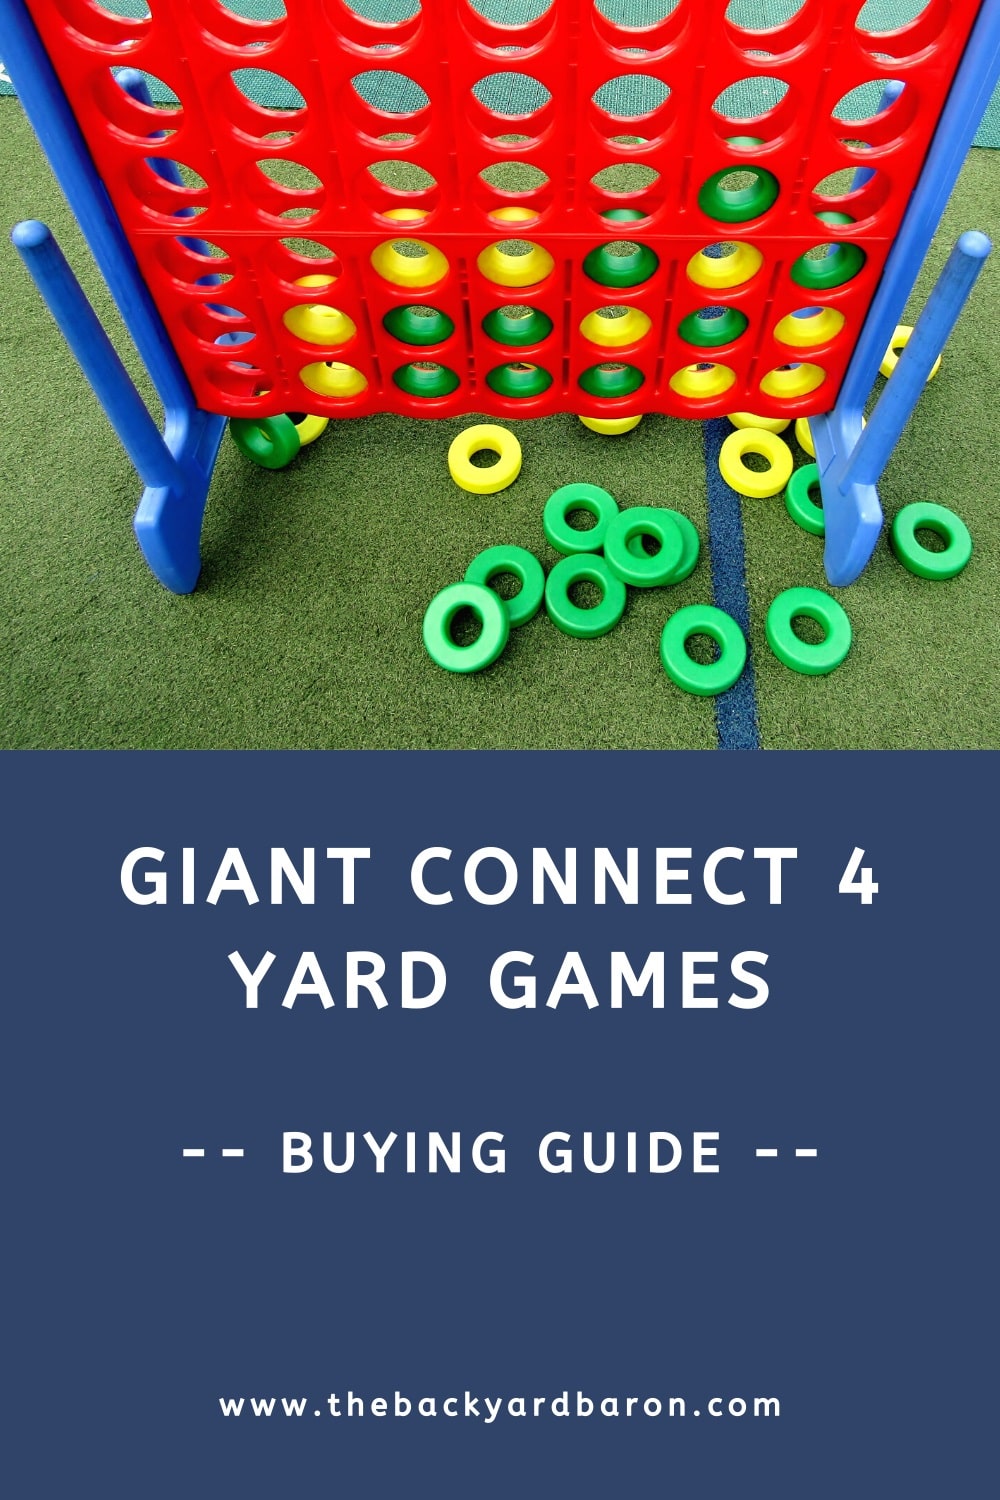 Giant connect 4 game buying guide